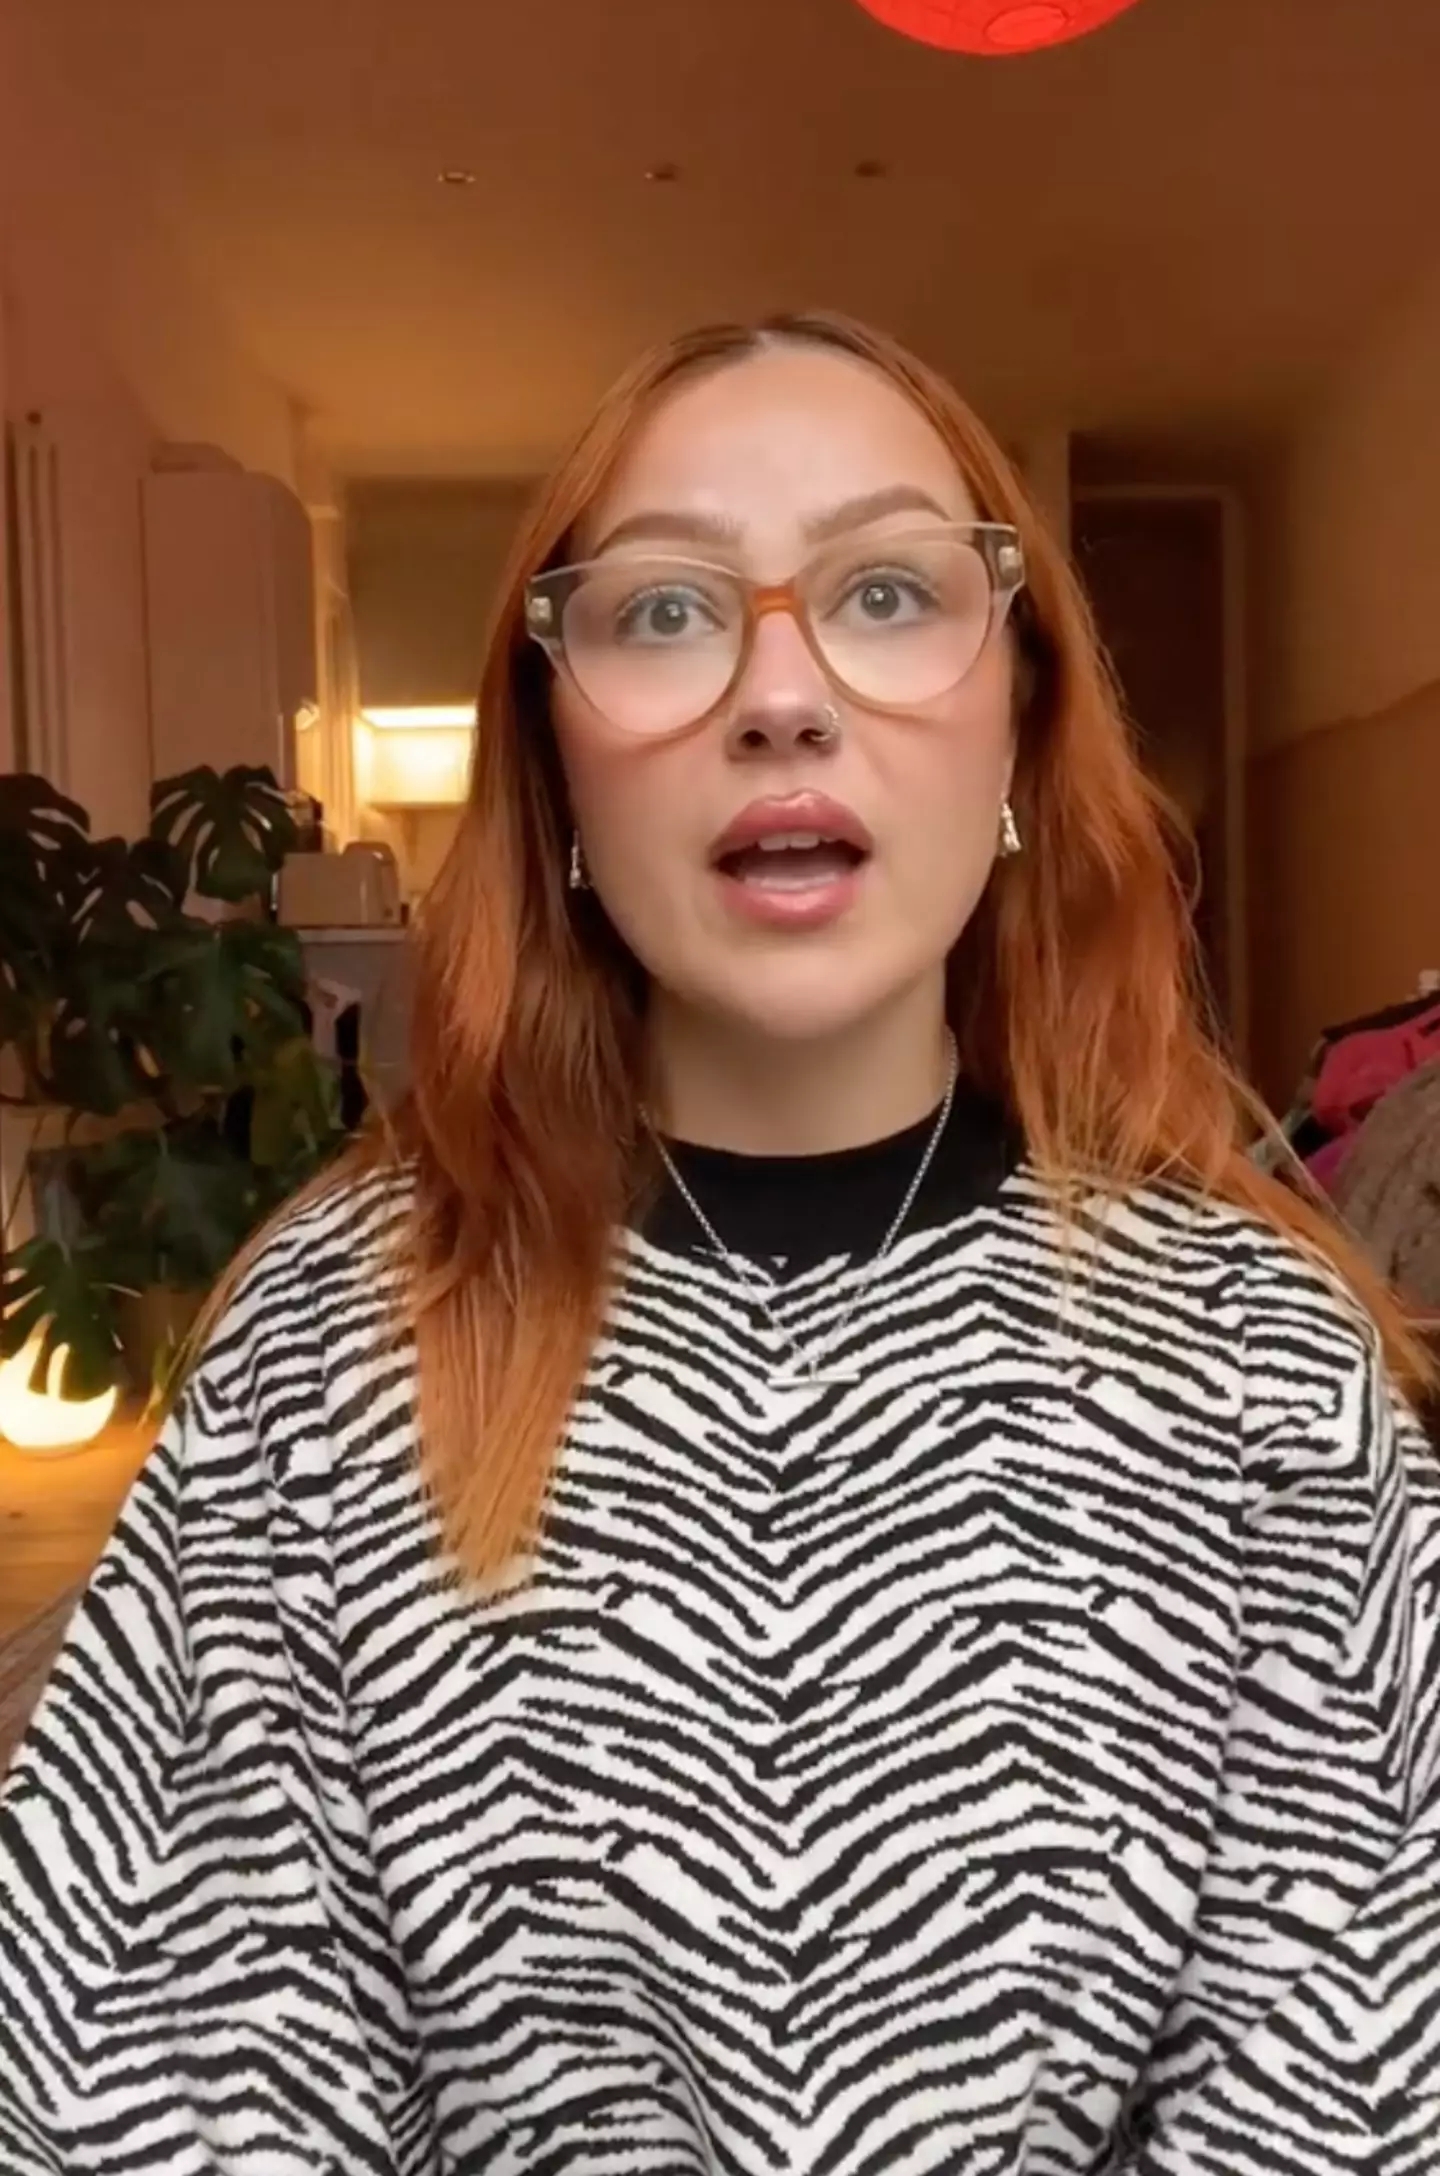 The TikTok star is fed up with feeling pressured to buy 'extravagant' presents.